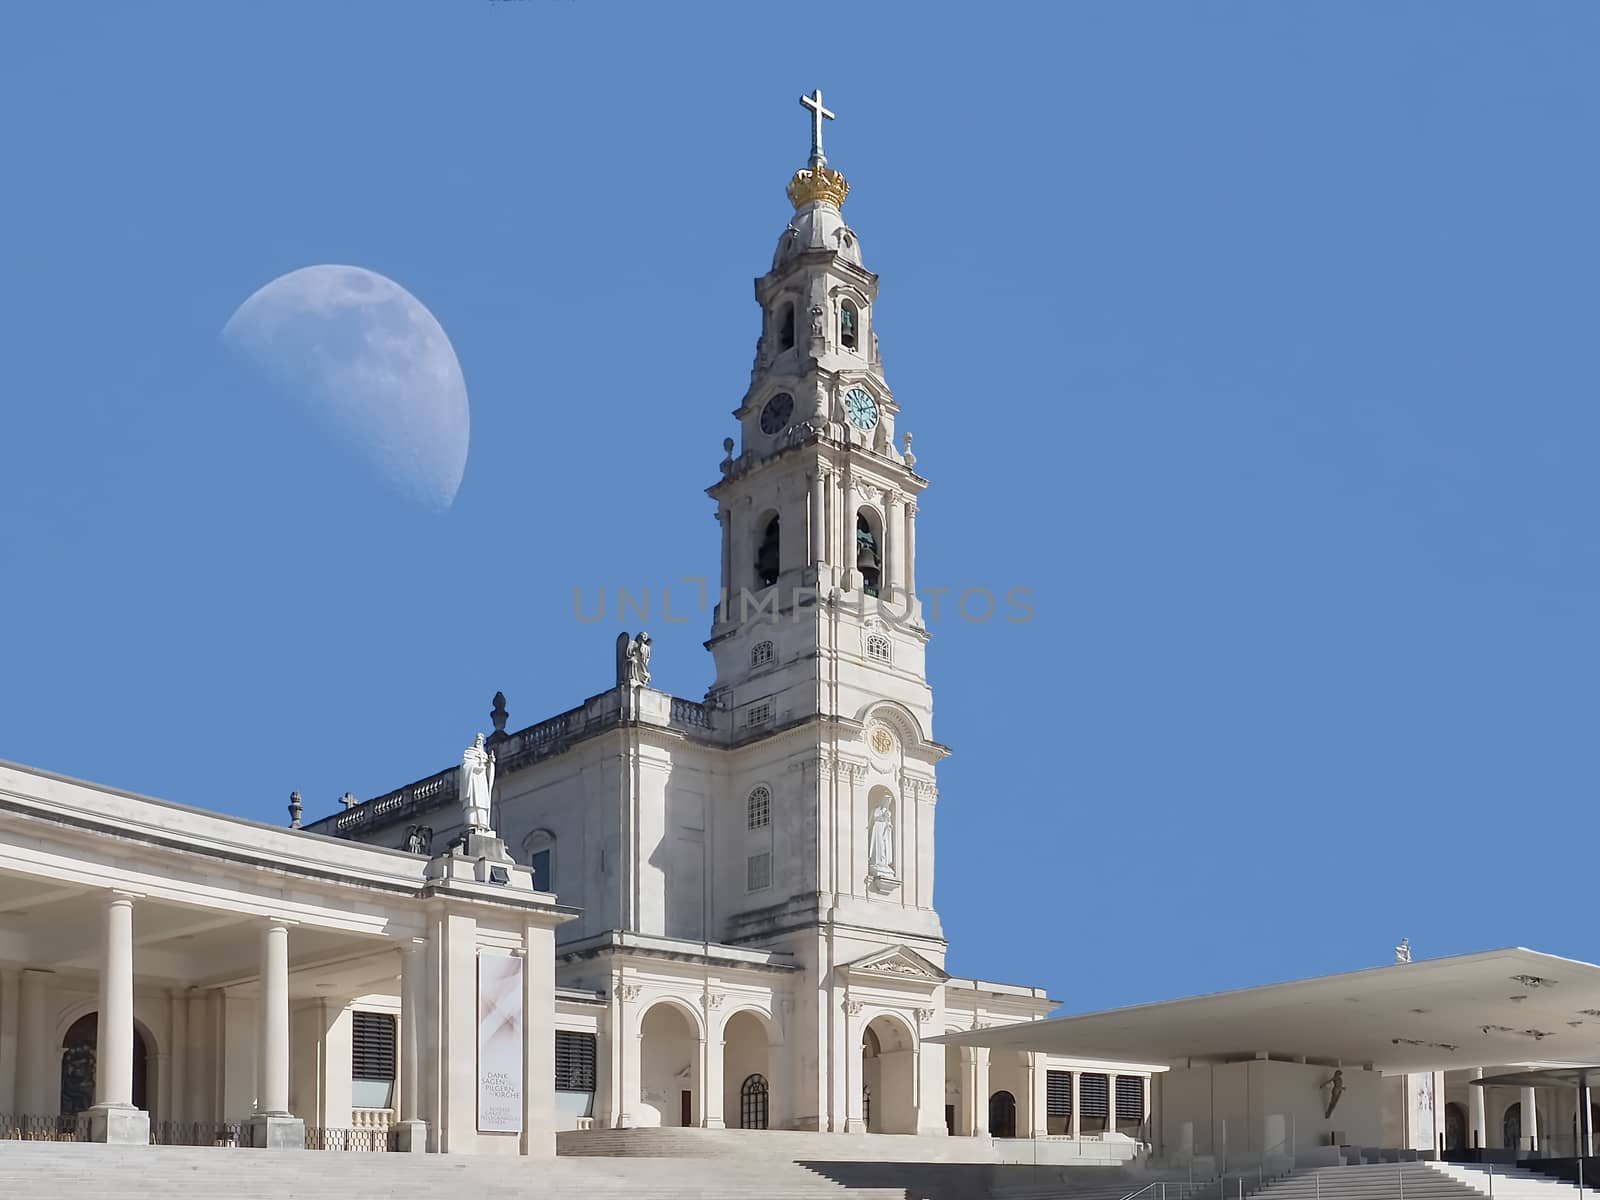 Church of Fatima in the Centro region of Portugal with a moon